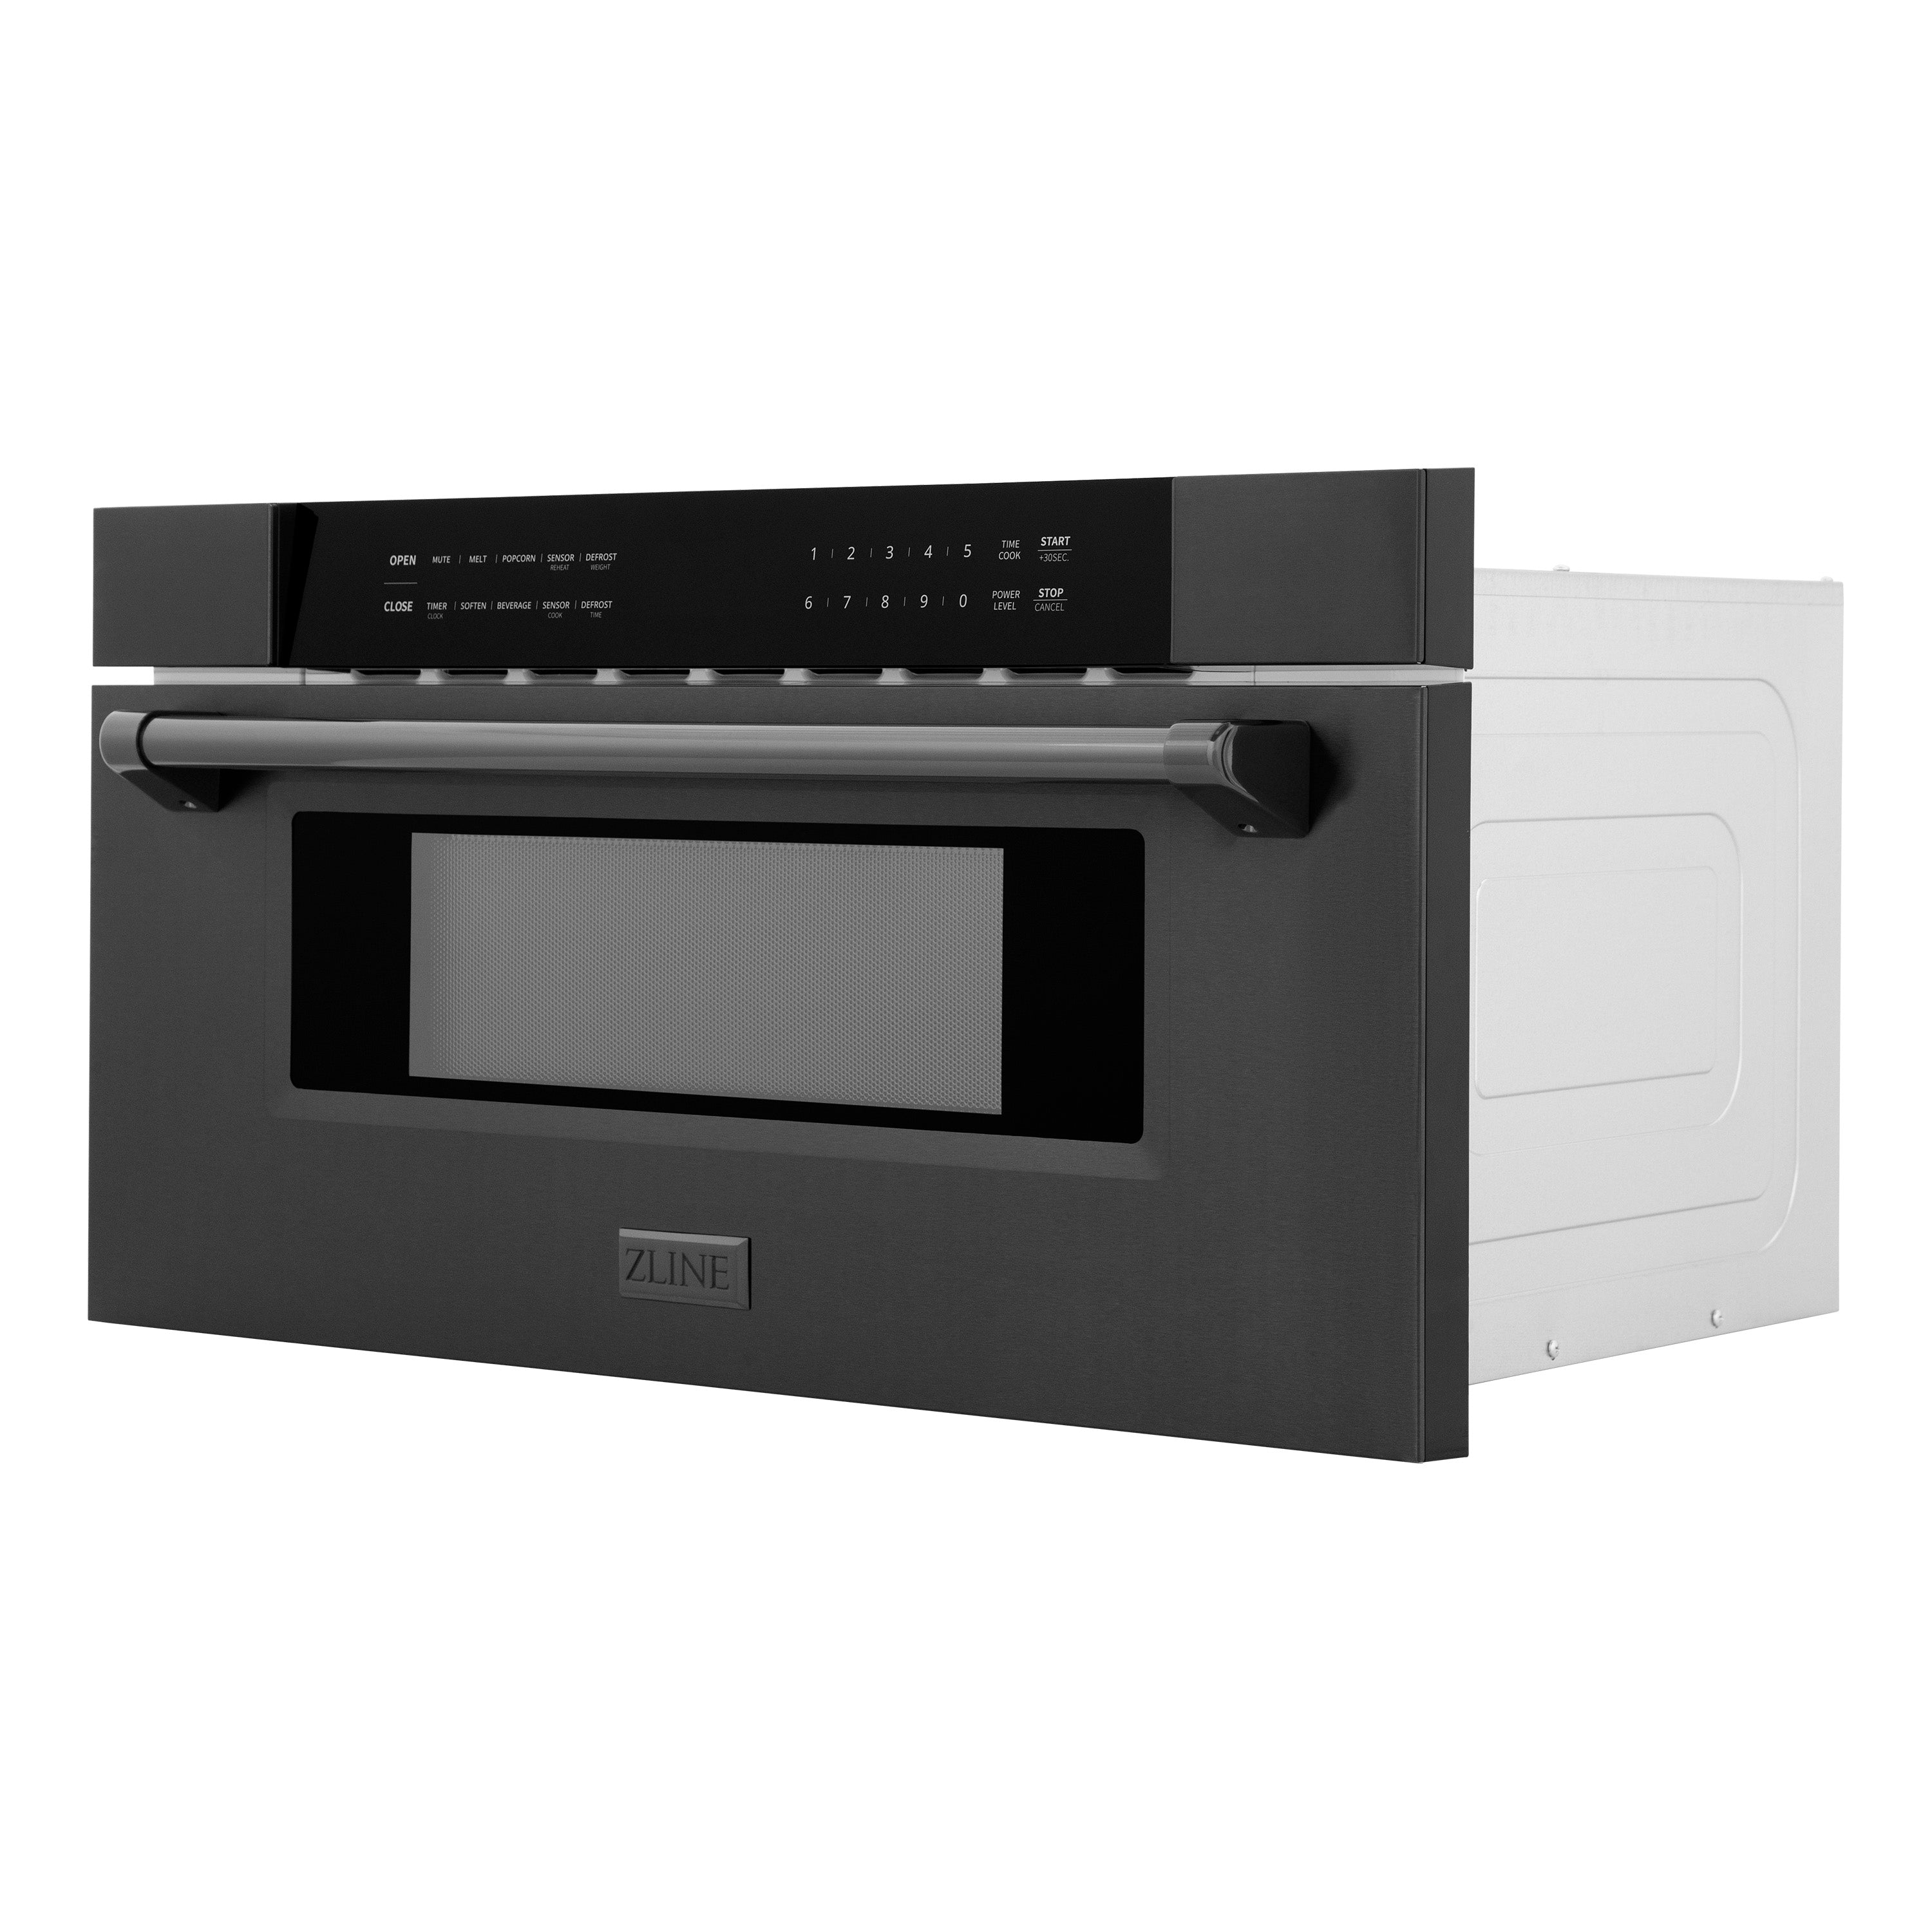 ZLINE 30 in. 1.2 cu. ft. Black Stainless Steel Built-In Microwave Drawer (MWD-30-BS) Side View Drawer Closed